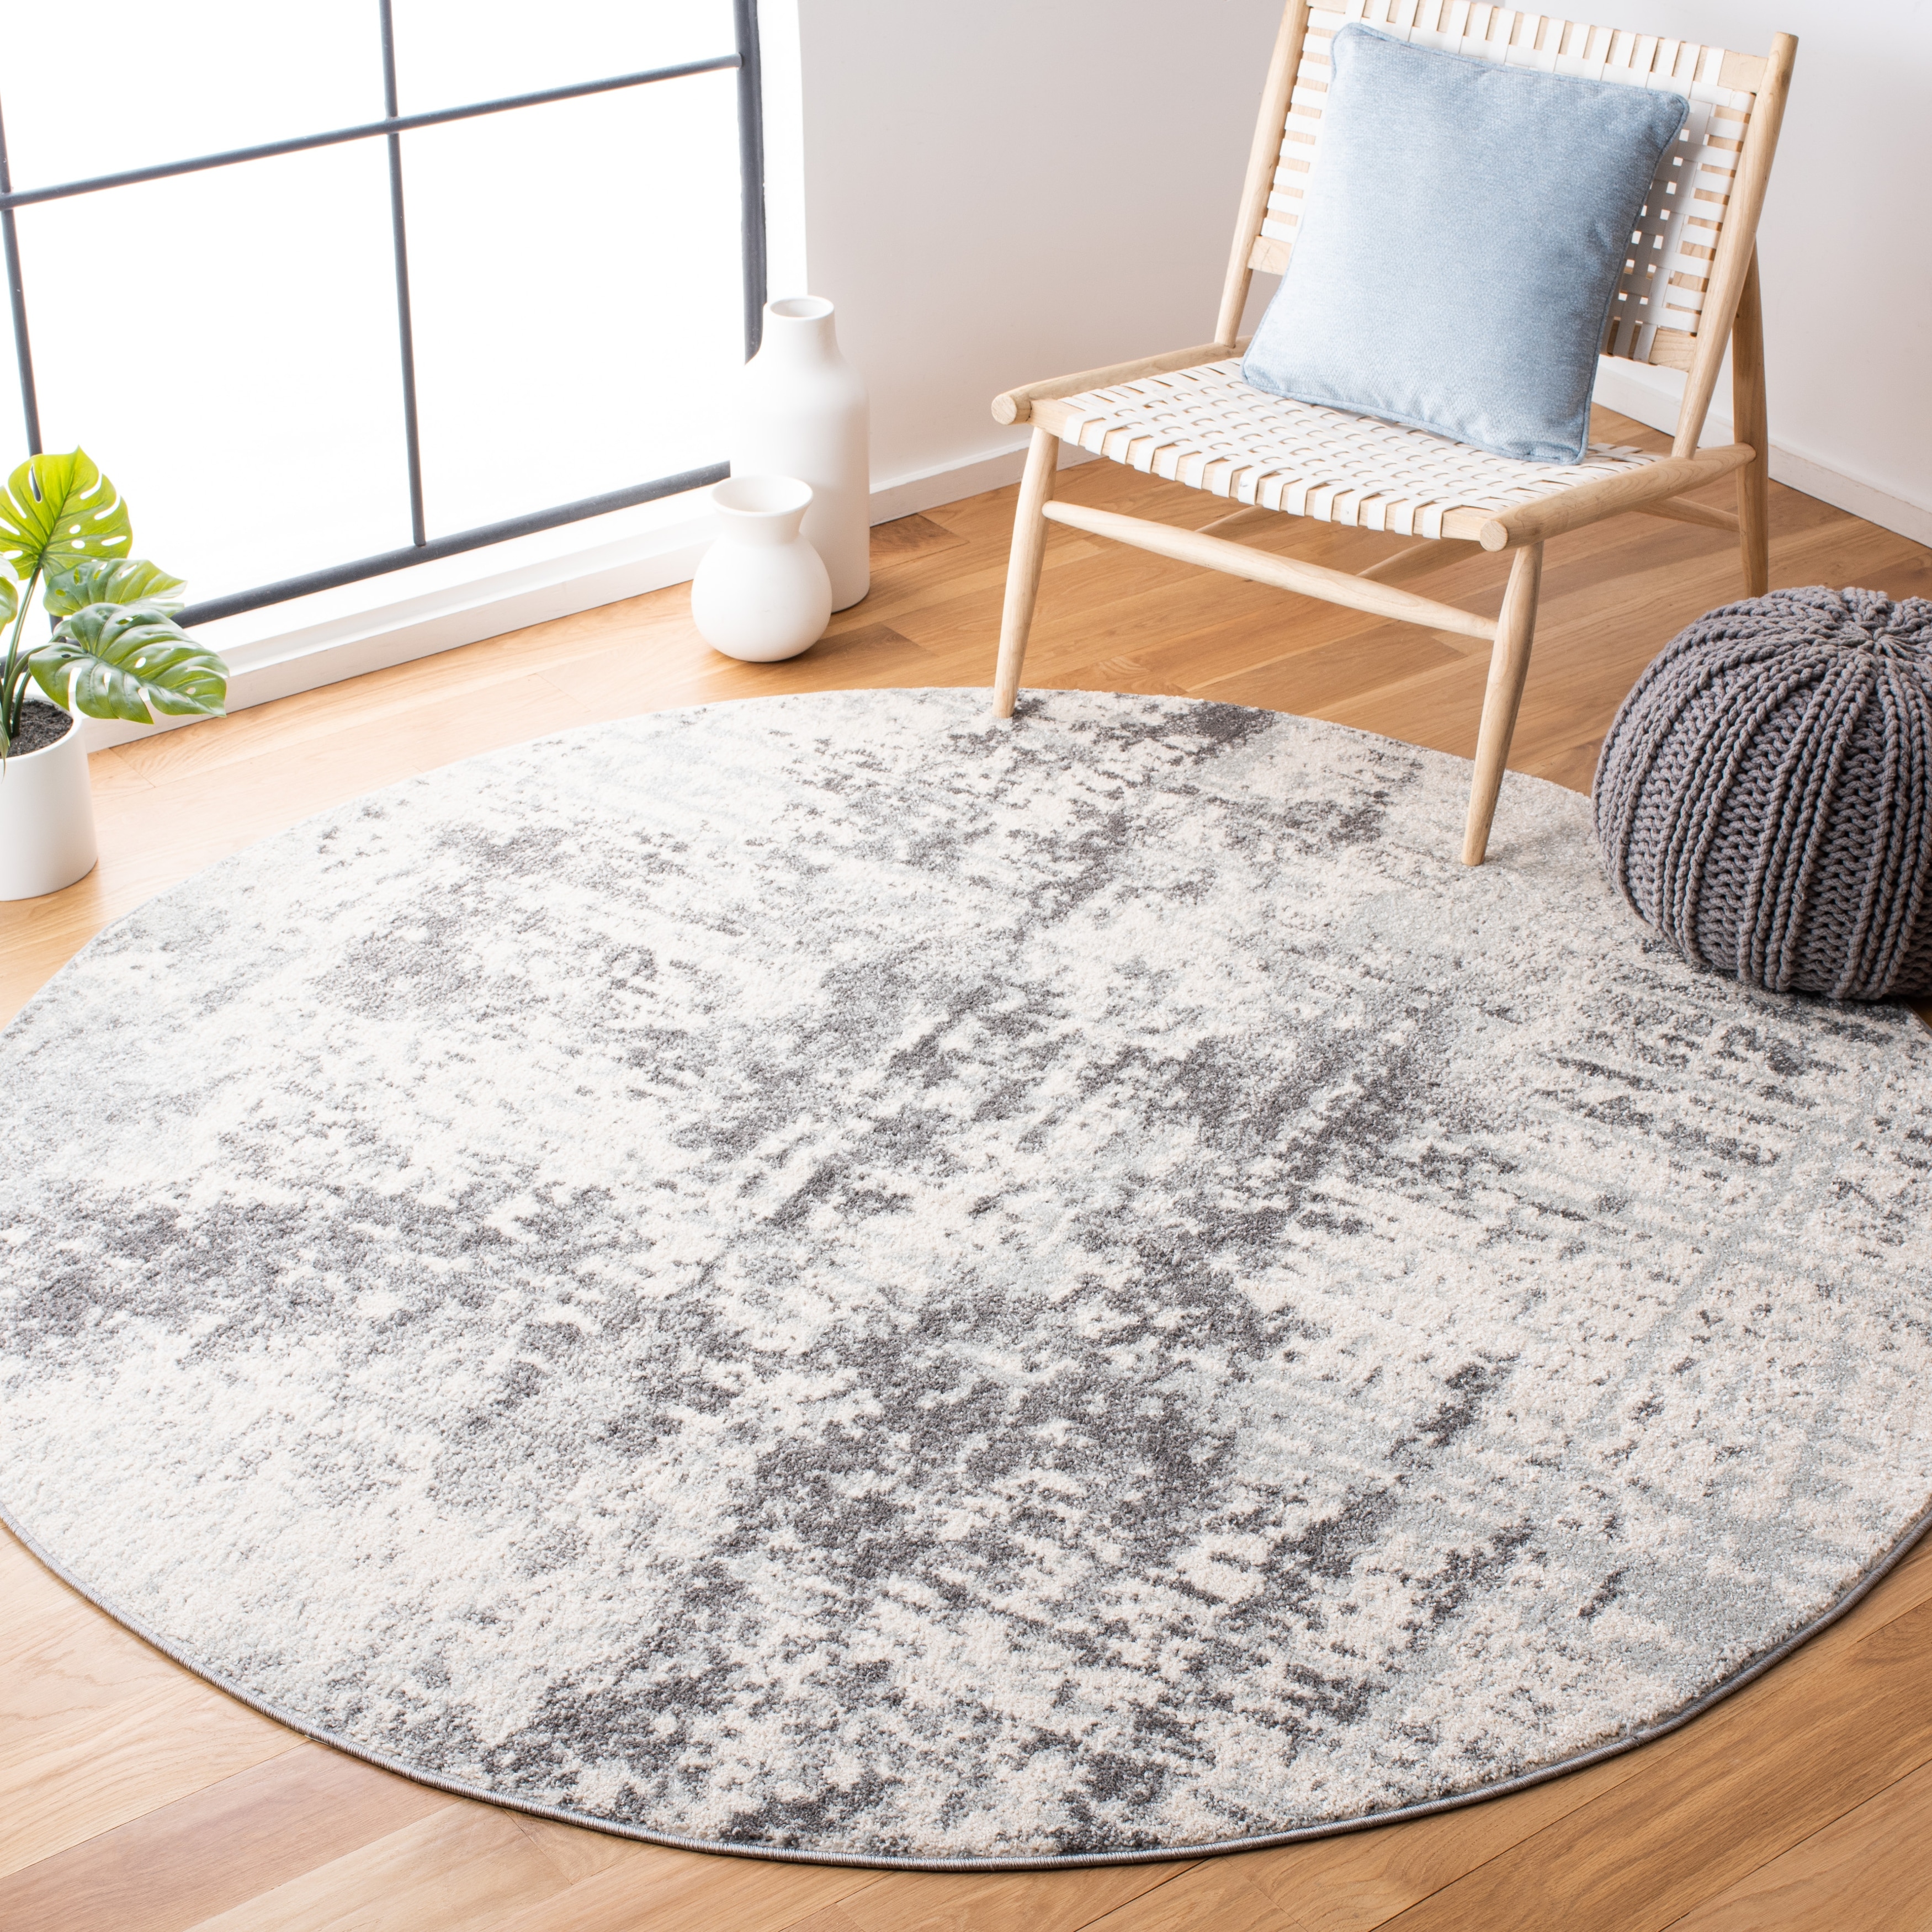 SAFAVIEH Tulum Collection TUL232C Modern Abstract Non-Shedding Living Room Bedroom Dining Home Office Area Rug 6'7 x 6'7 Square Ivory Dark Blue 